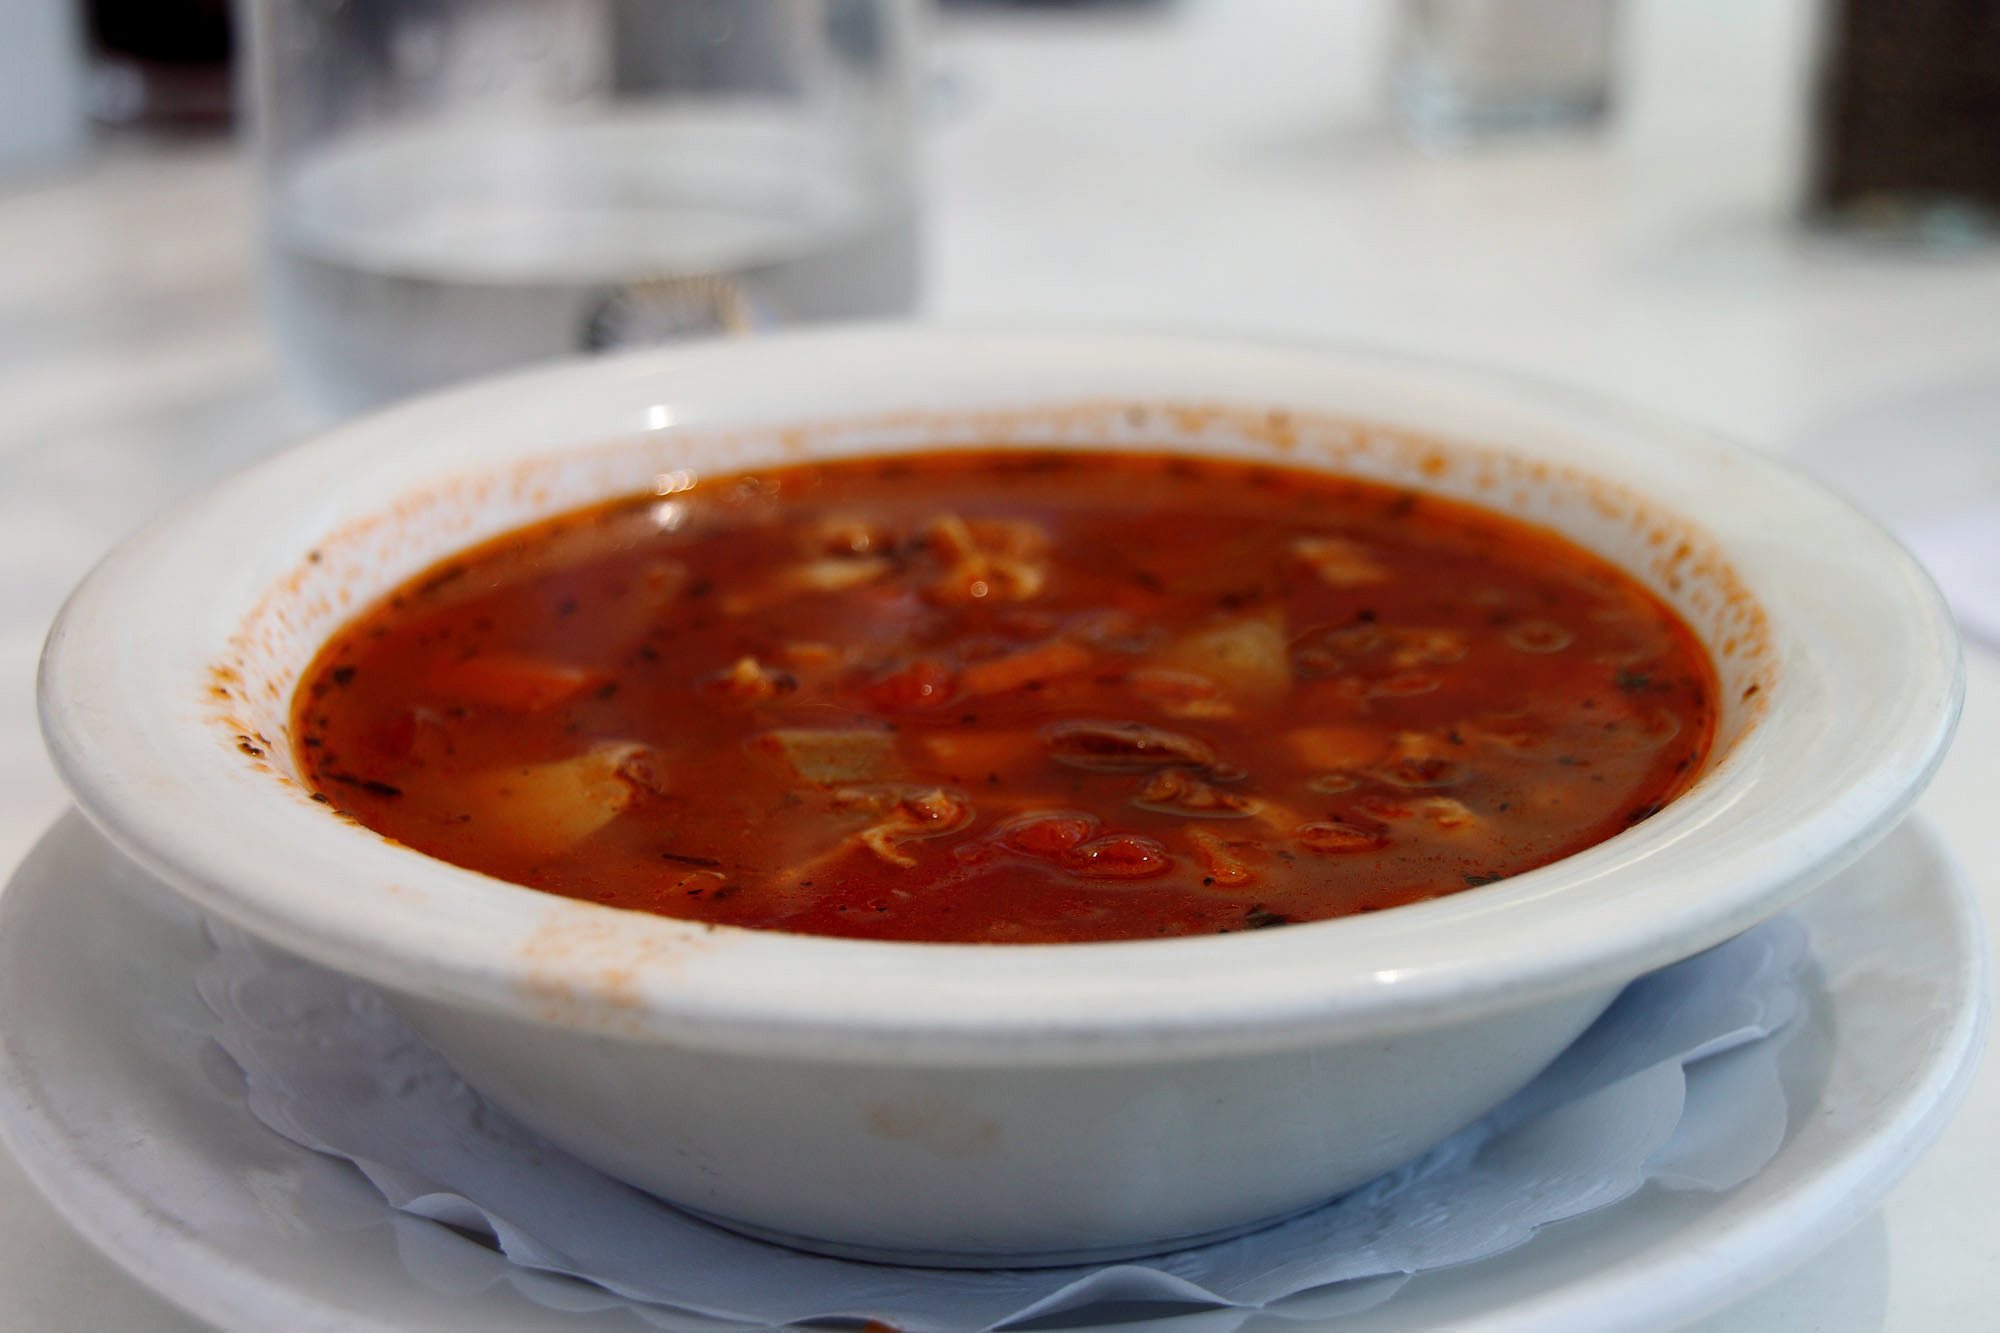 Manhattan is known for a tomato-based clam chowder.